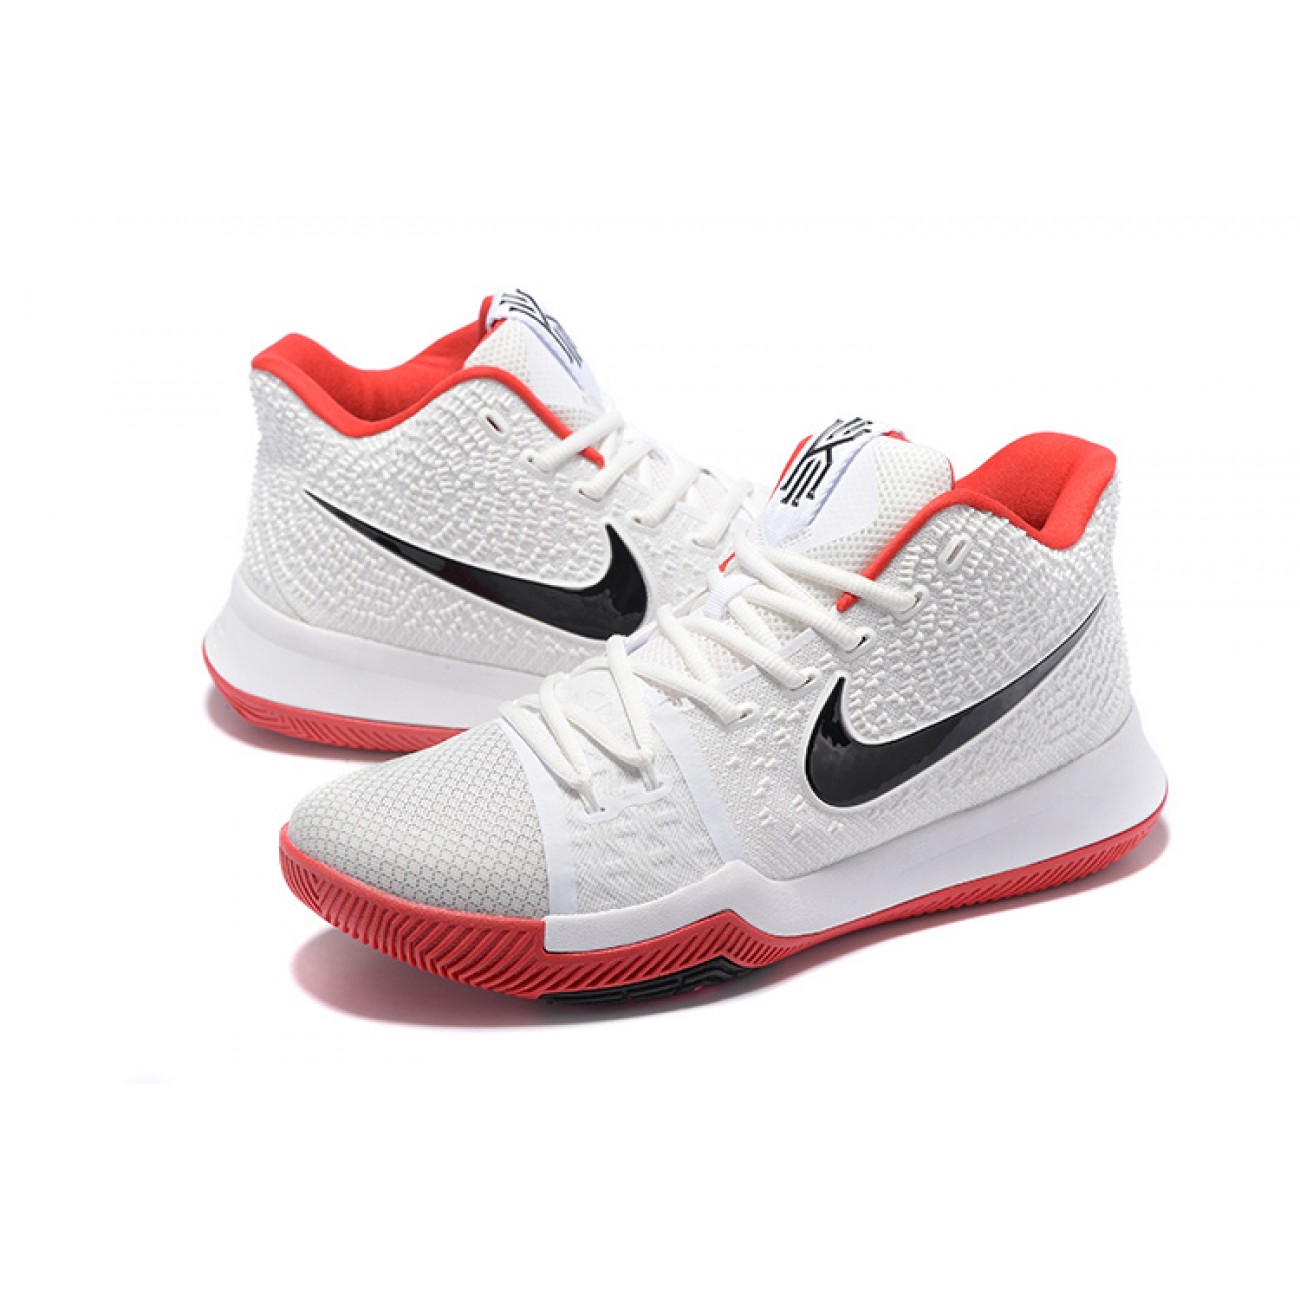 Kyrie 3 White/Red